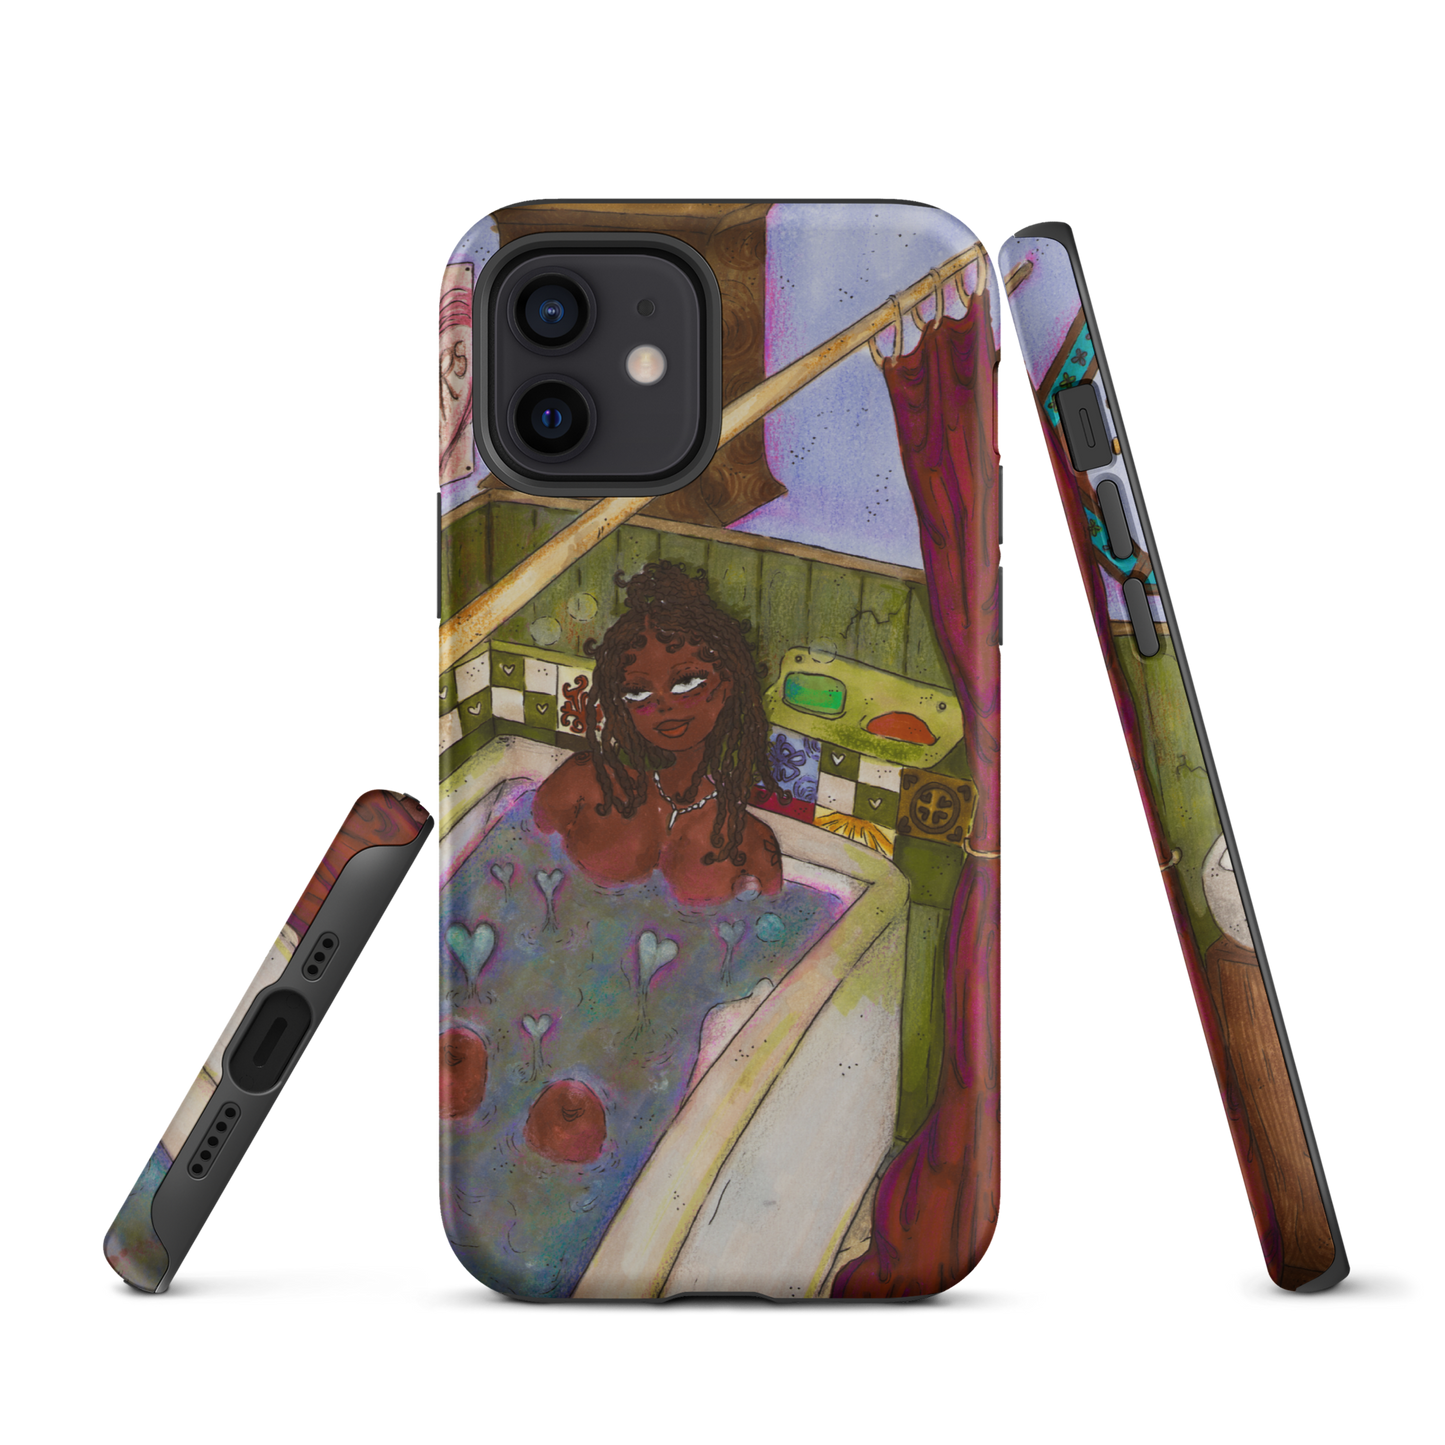 "i forgot loving myself can feel this good" fullcover iphone case